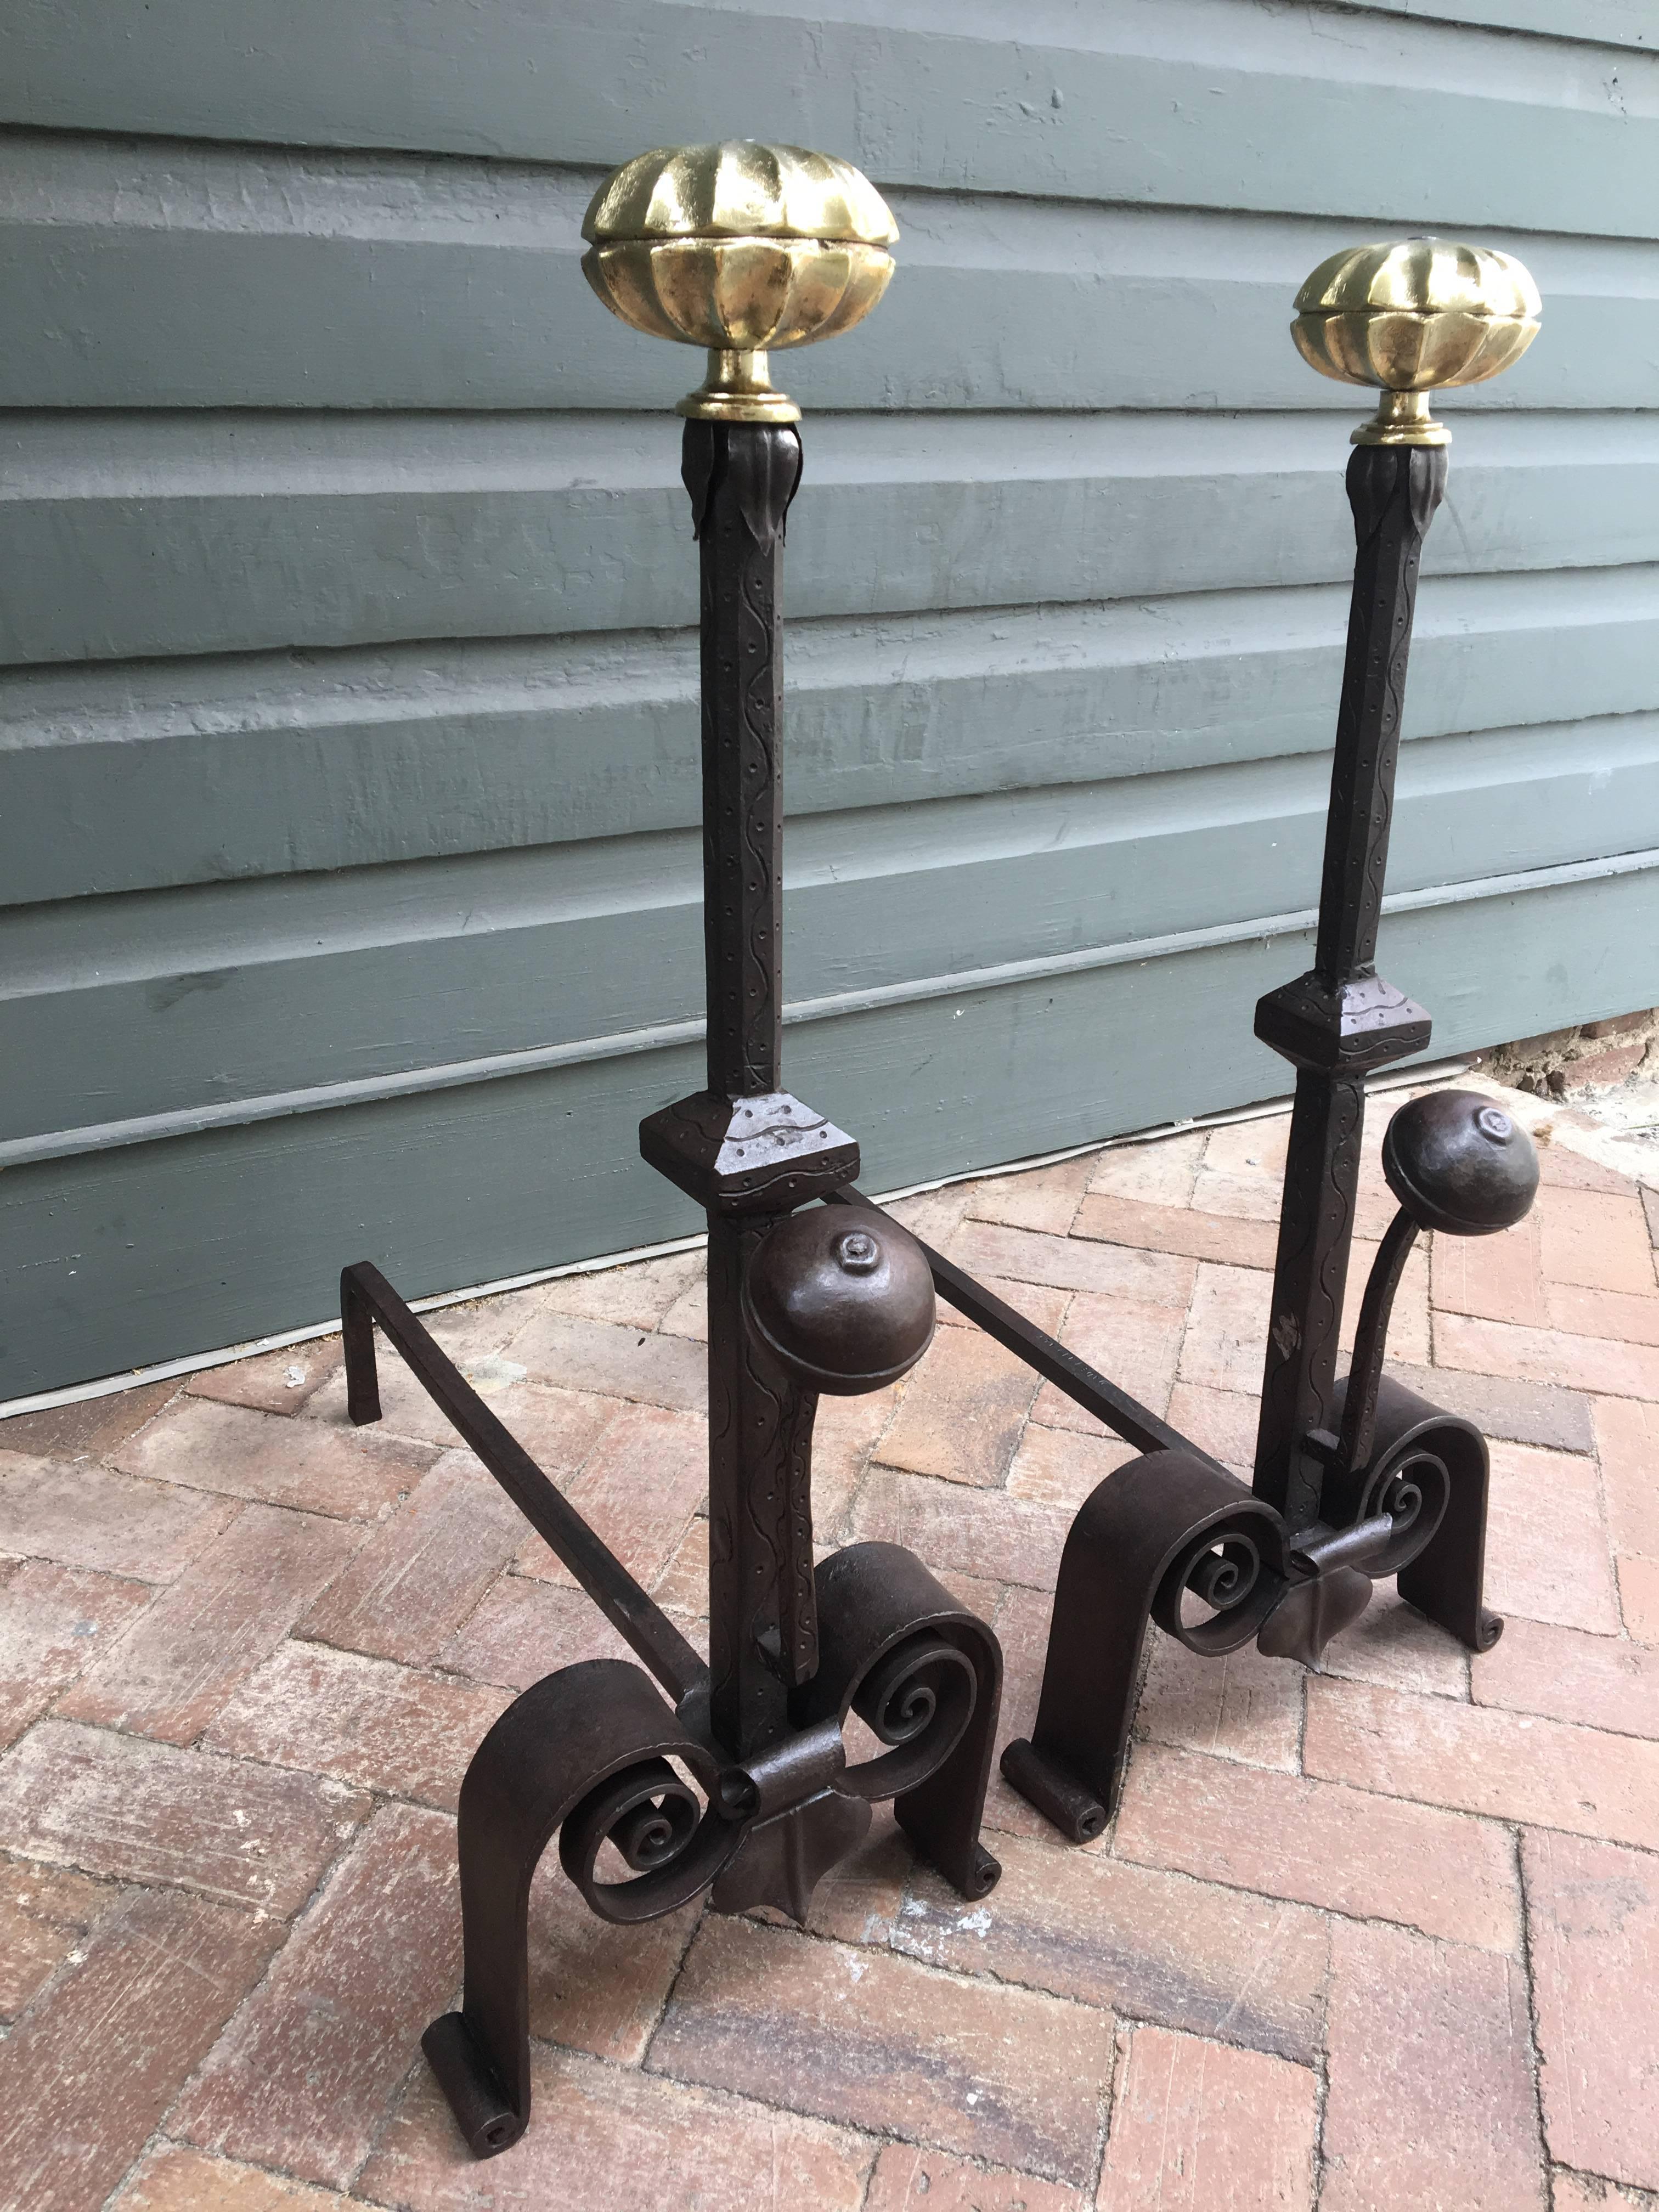 These 19th century Italian andirons have hand wrought engraved centre pedestals ending in scroll stylized legs. The melon tops are cast brass.